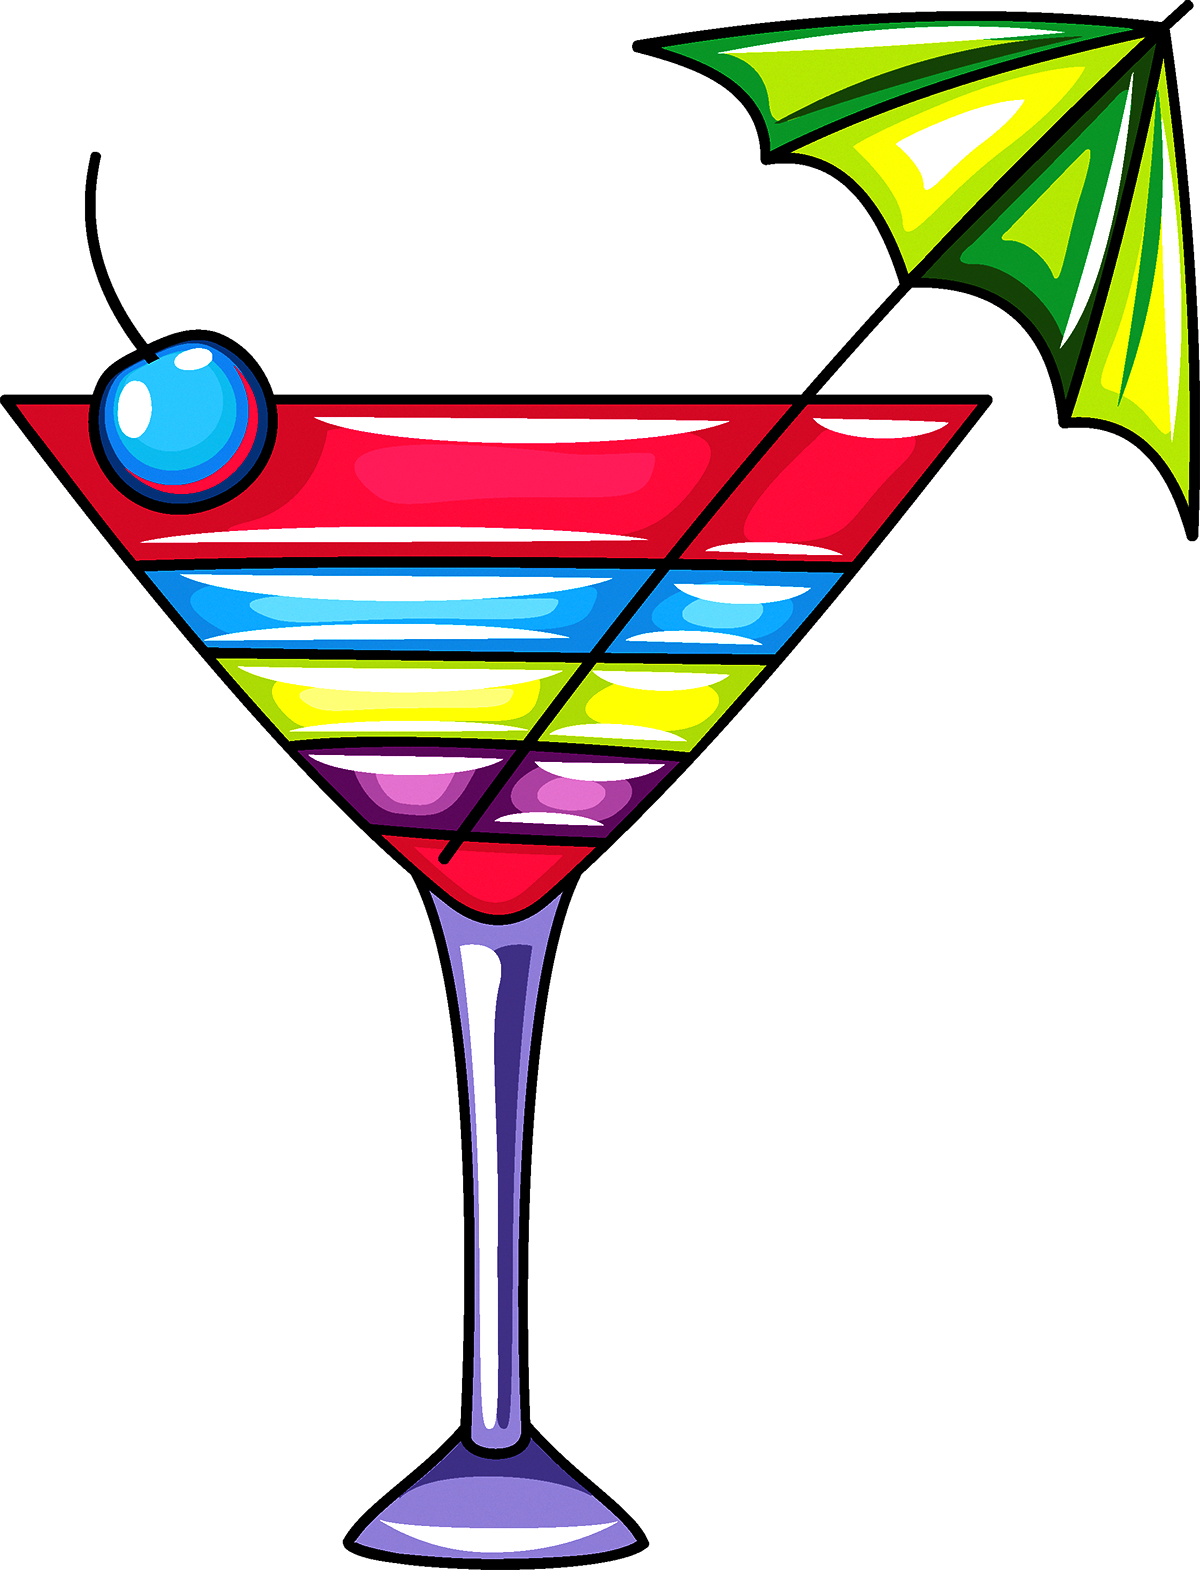 Martini clipart pink wine glass. Cocktail soft drink lady